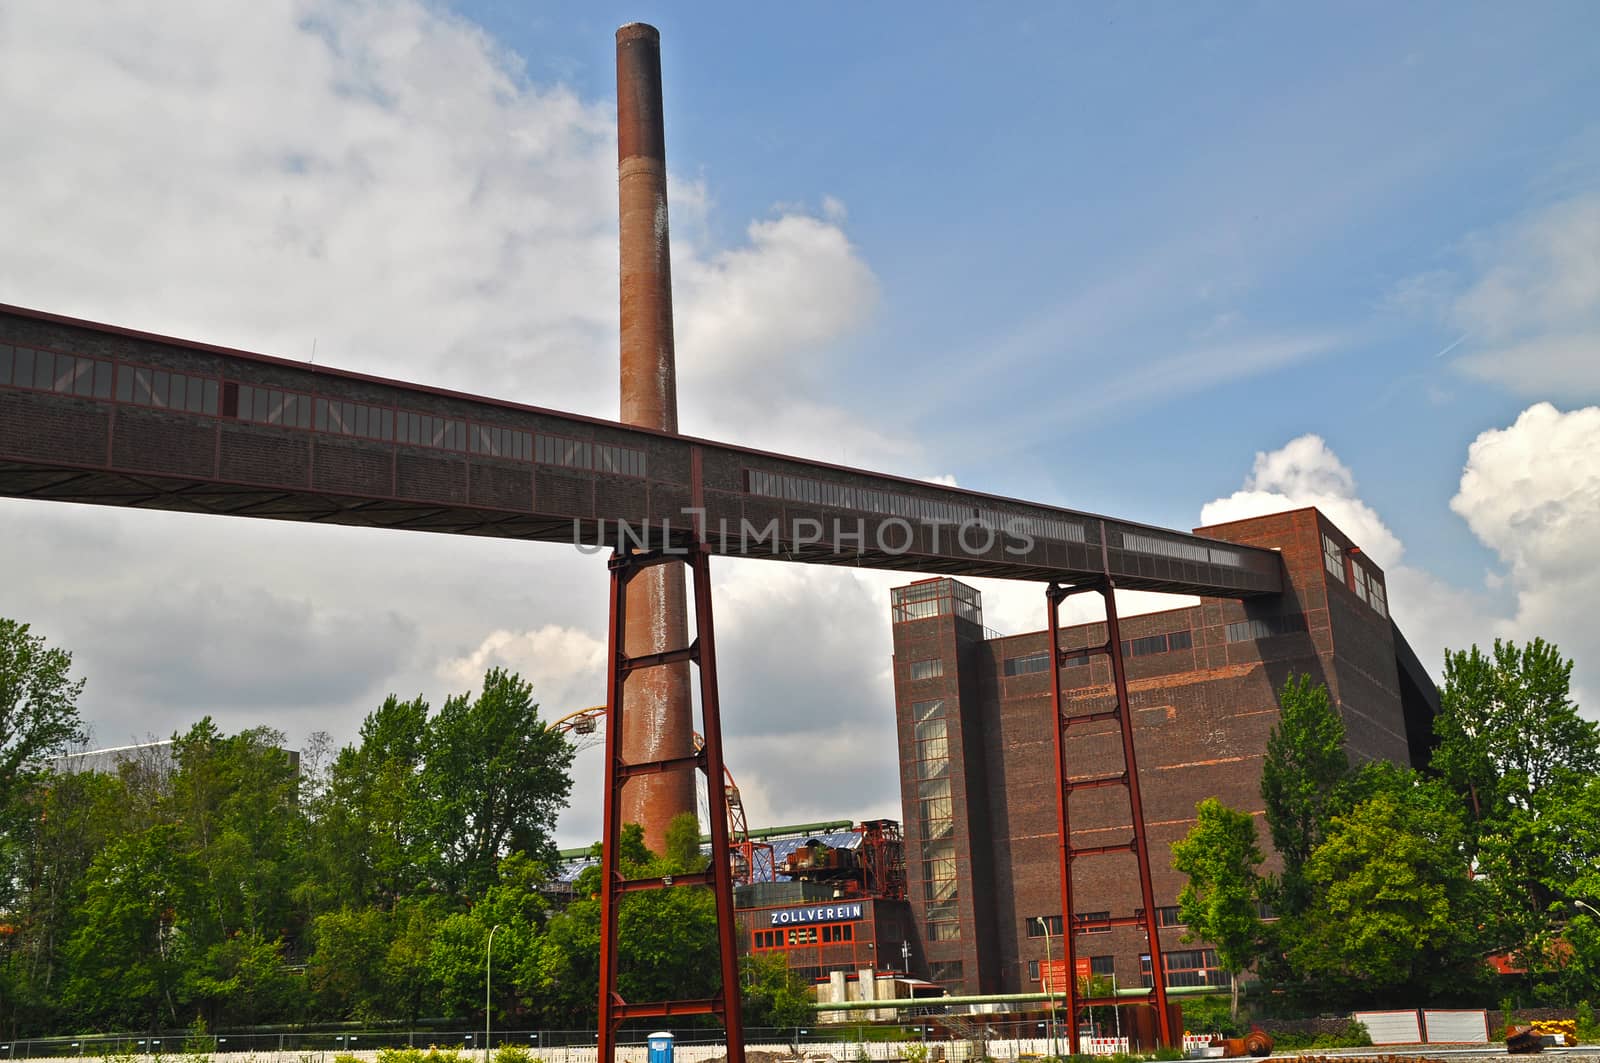 Abandoned industry in Essen, Germany.